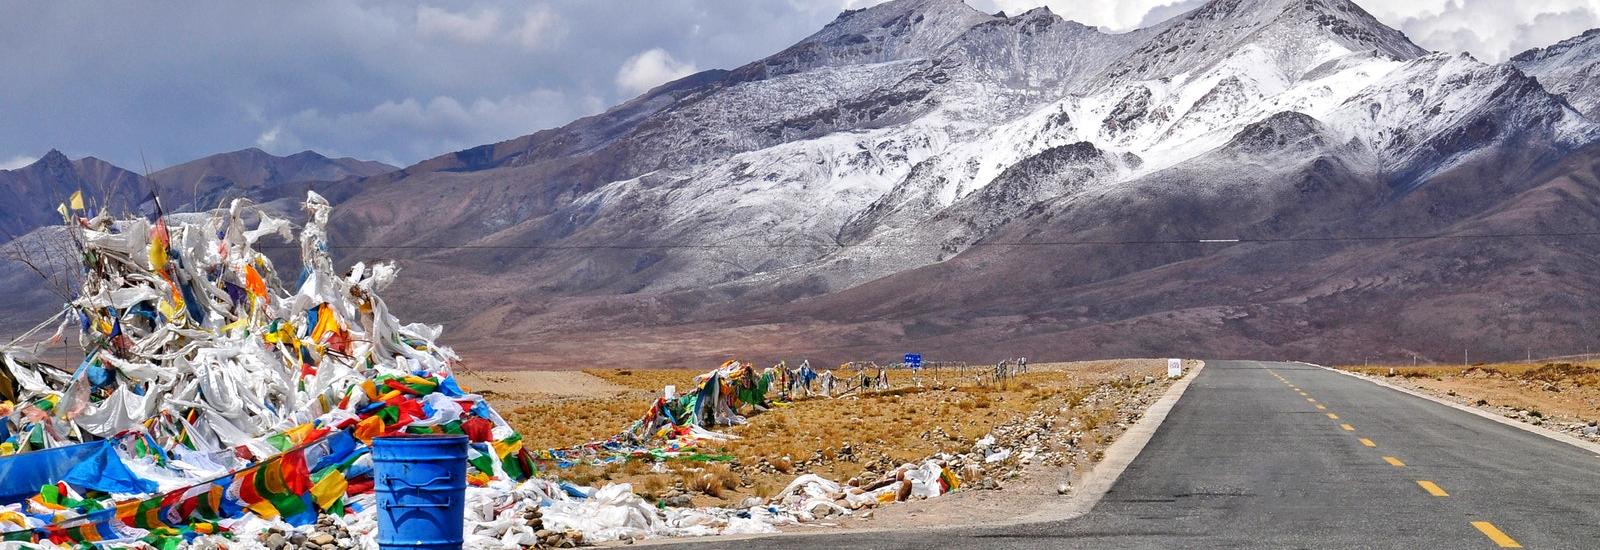 Blue trash can on paved road  with colorful fabric trash pieces all over and snow covered mountains at a distance